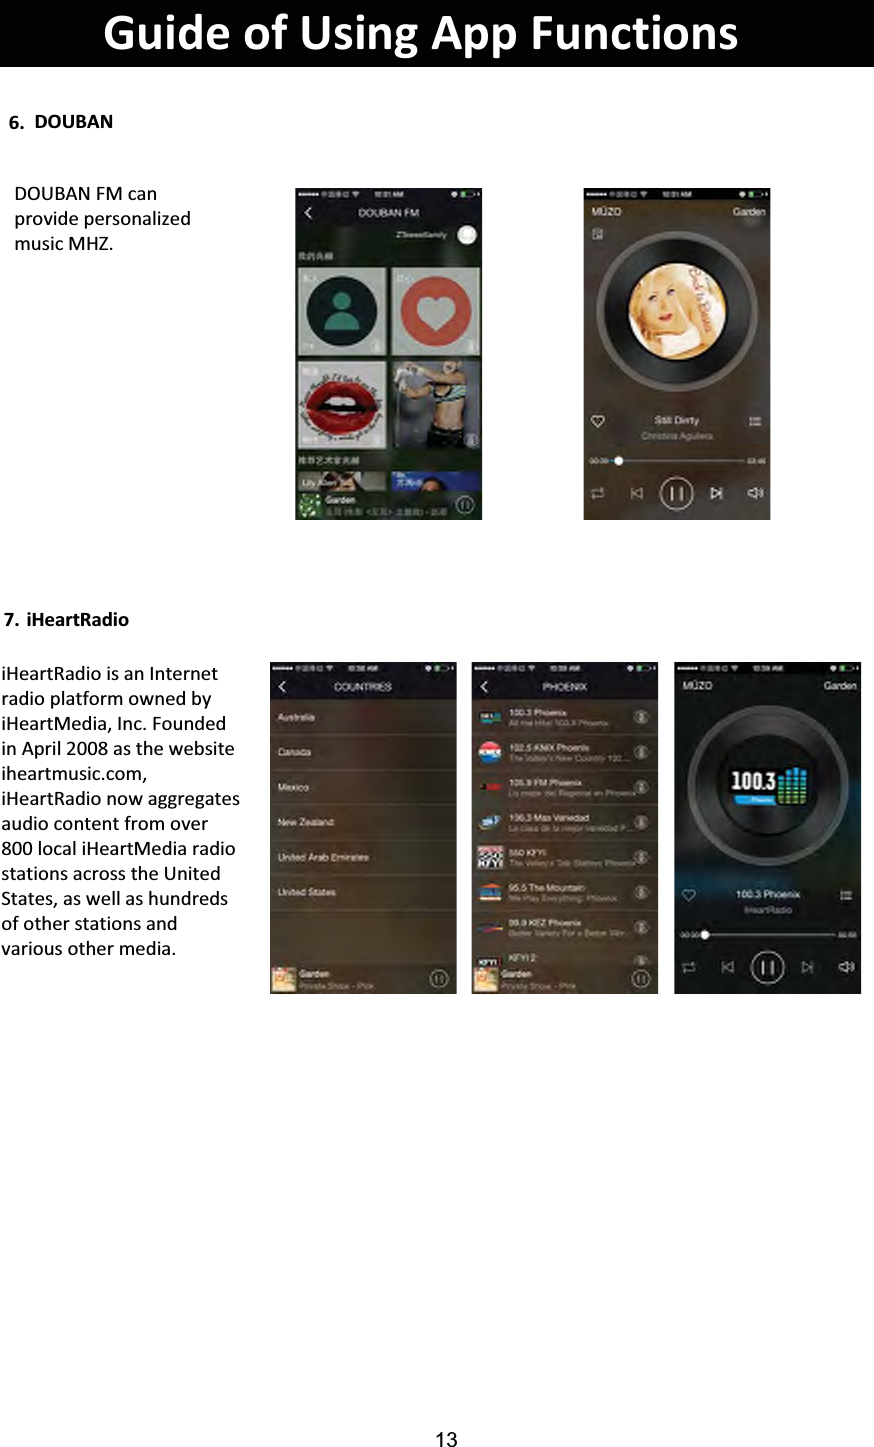 BANGuide of Using App Functions136. 7. DOUDOUBAN FM can provide personalized music MHZ.iHeartRadio is an Internet radio platform owned by iHeartMedia, Inc. Founded in April 2008 as the website iheartmusic.com, iHeartRadio now aggregates audio content from over 800 local iHeartMedia radio stations across the United States, as well as hundreds of other stations and various other media. artRadioiHe